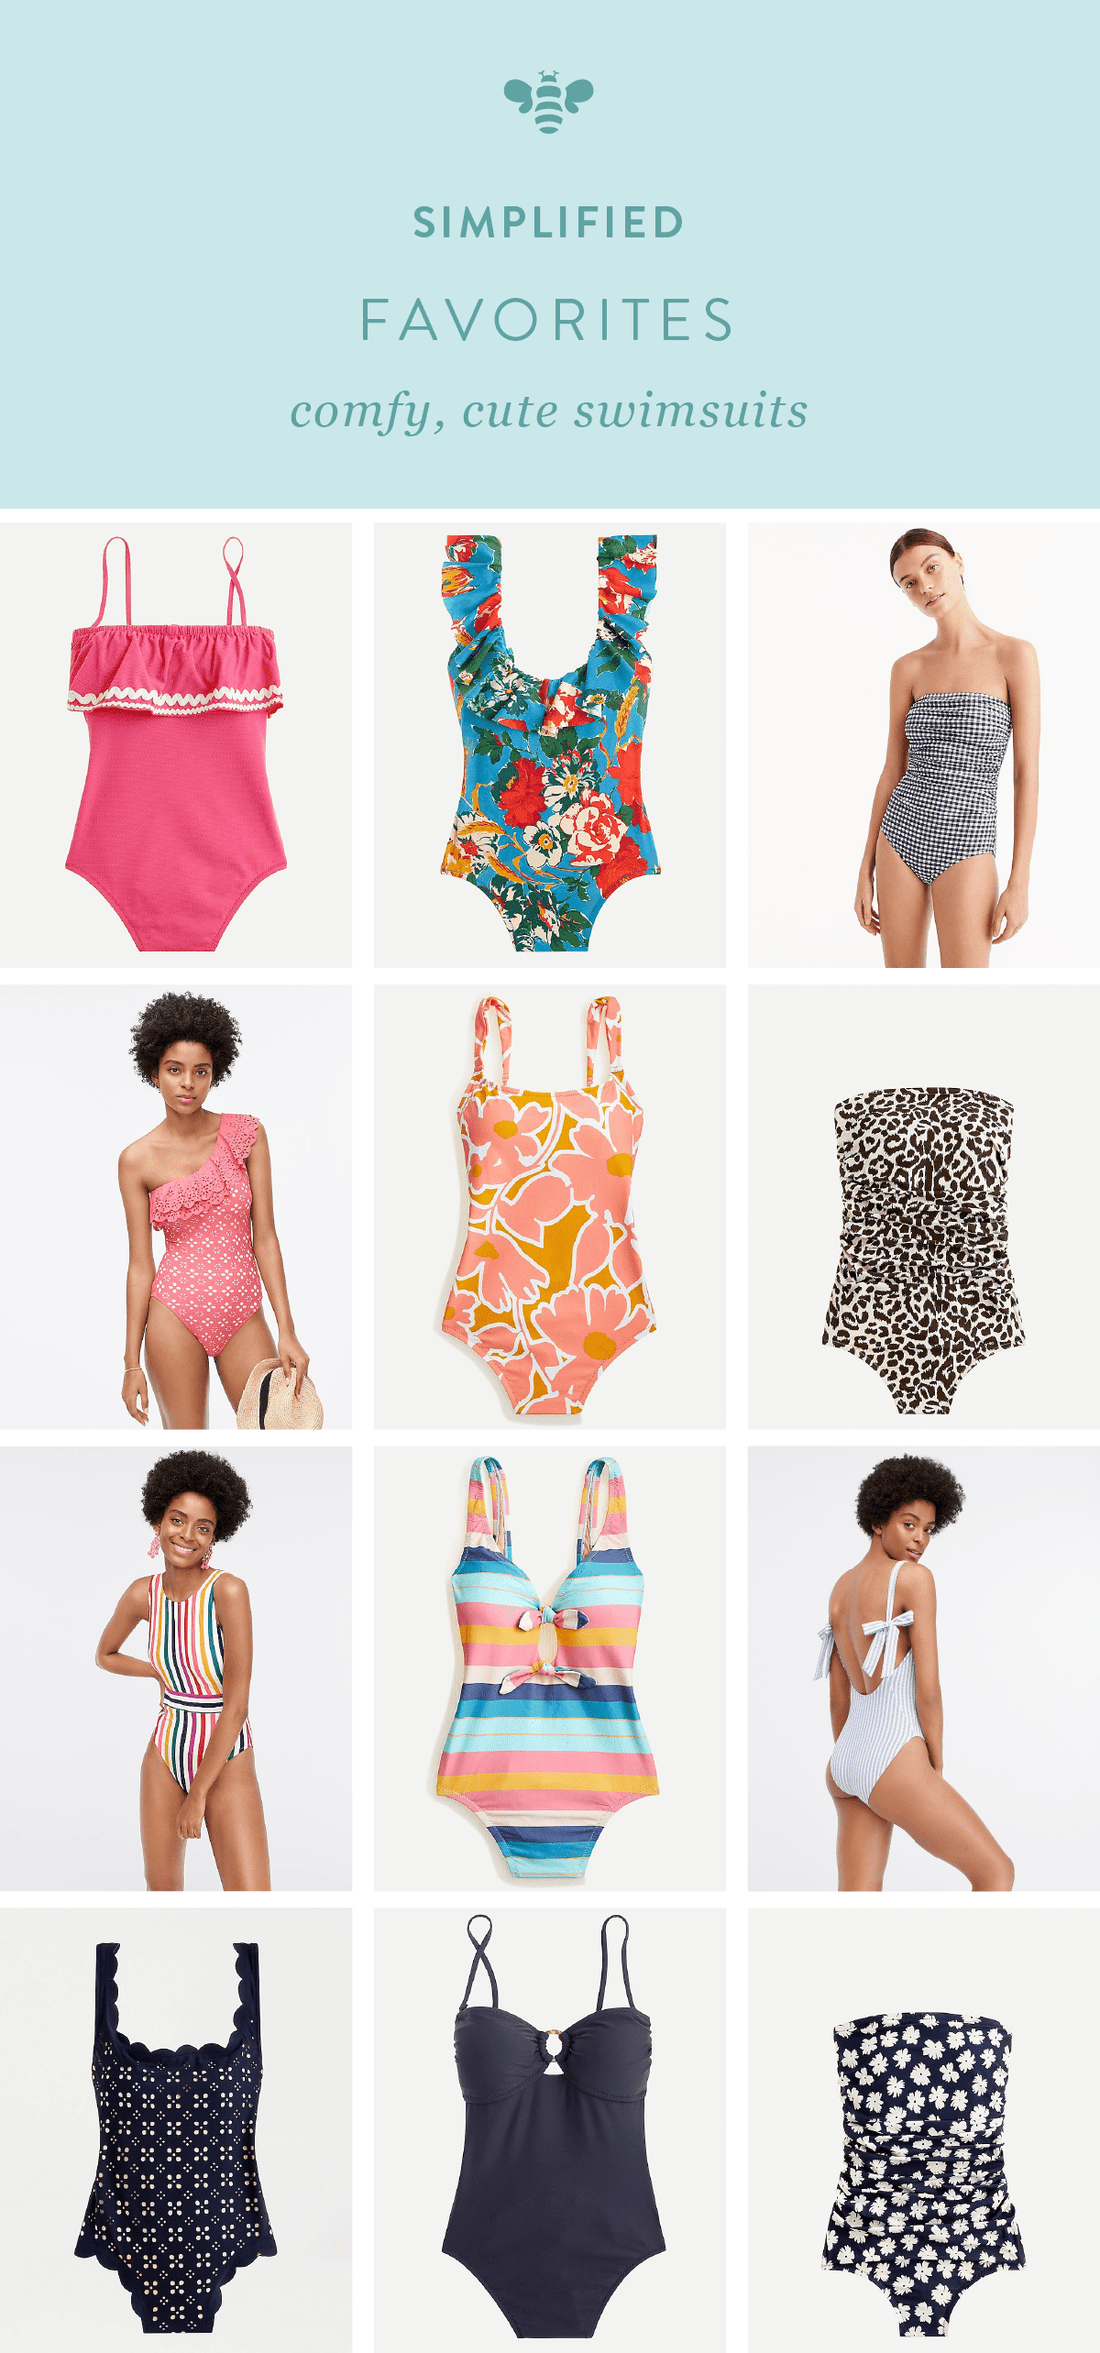 Simplified Favorites: Cute, Comfy, Well-Covering Swimsuits